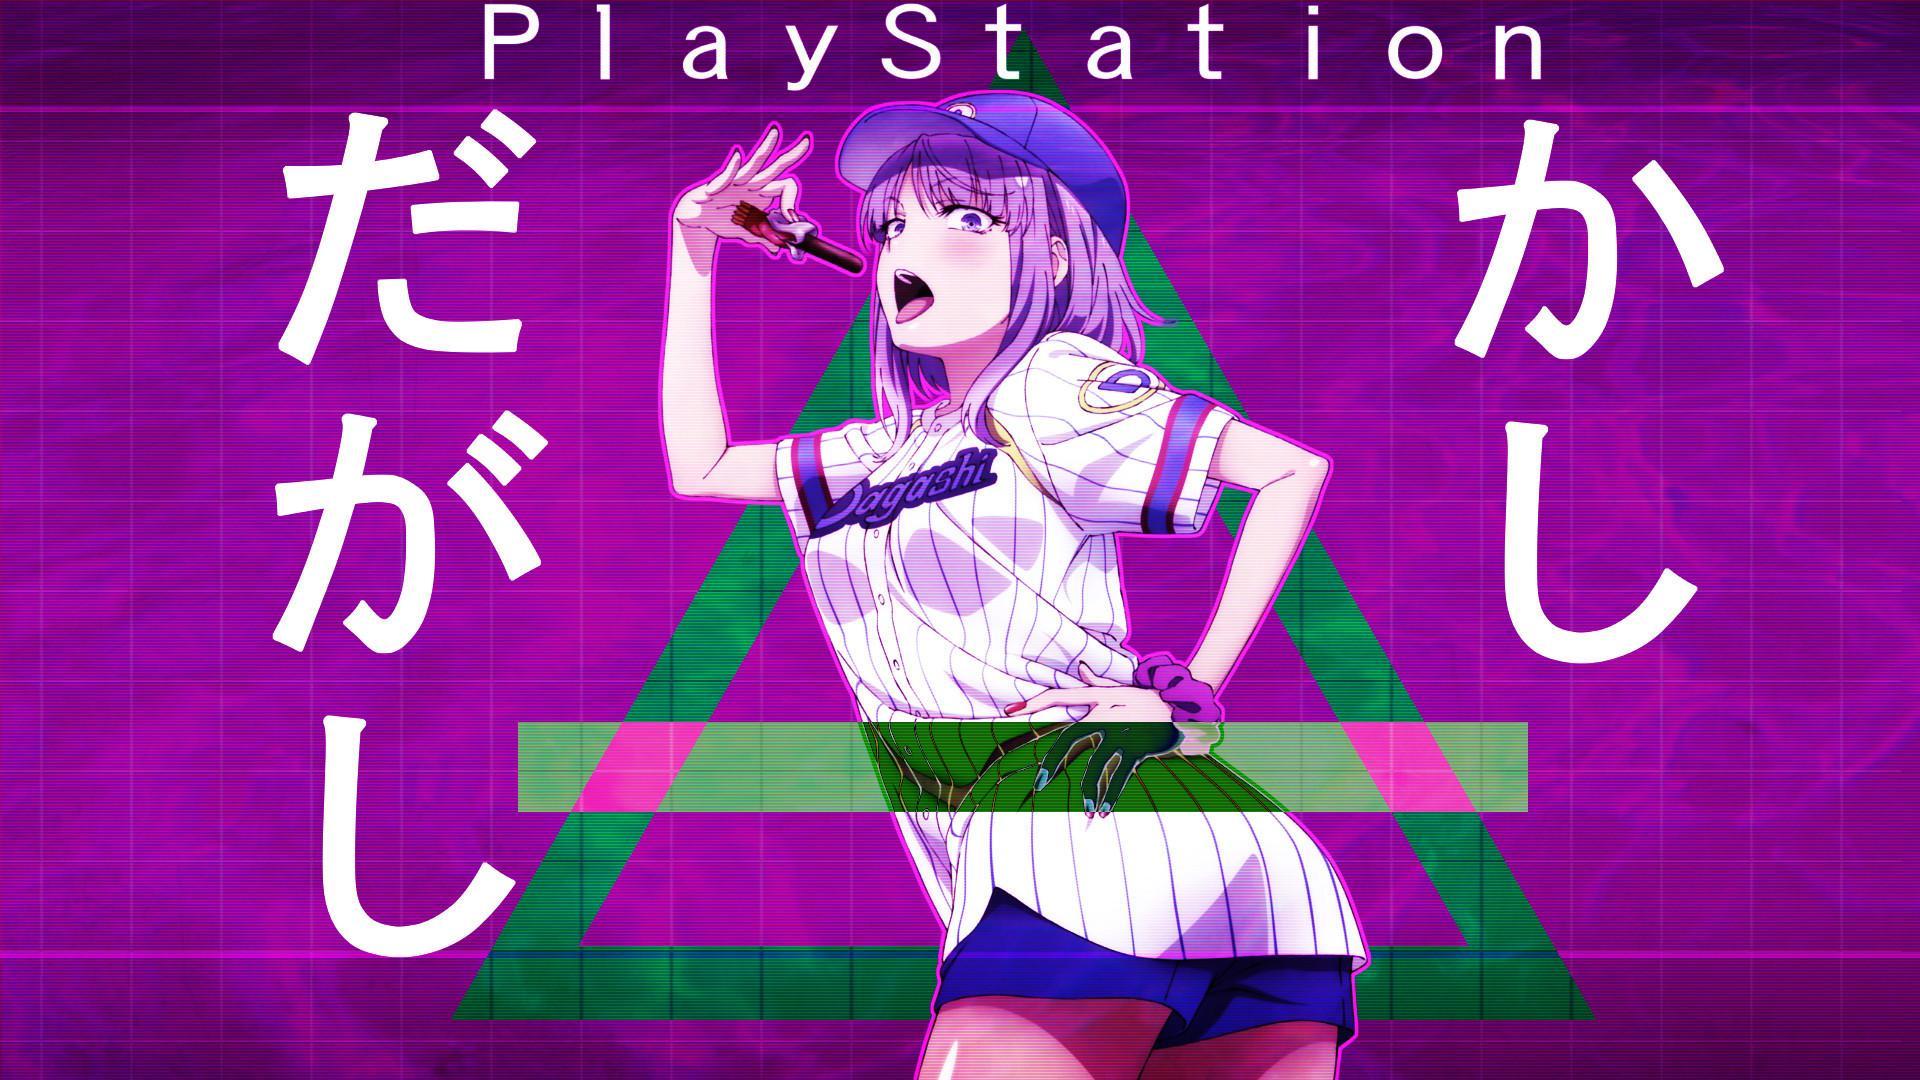 1920x1080 Vaporwave: Aesthetic Wallpaper cho Android